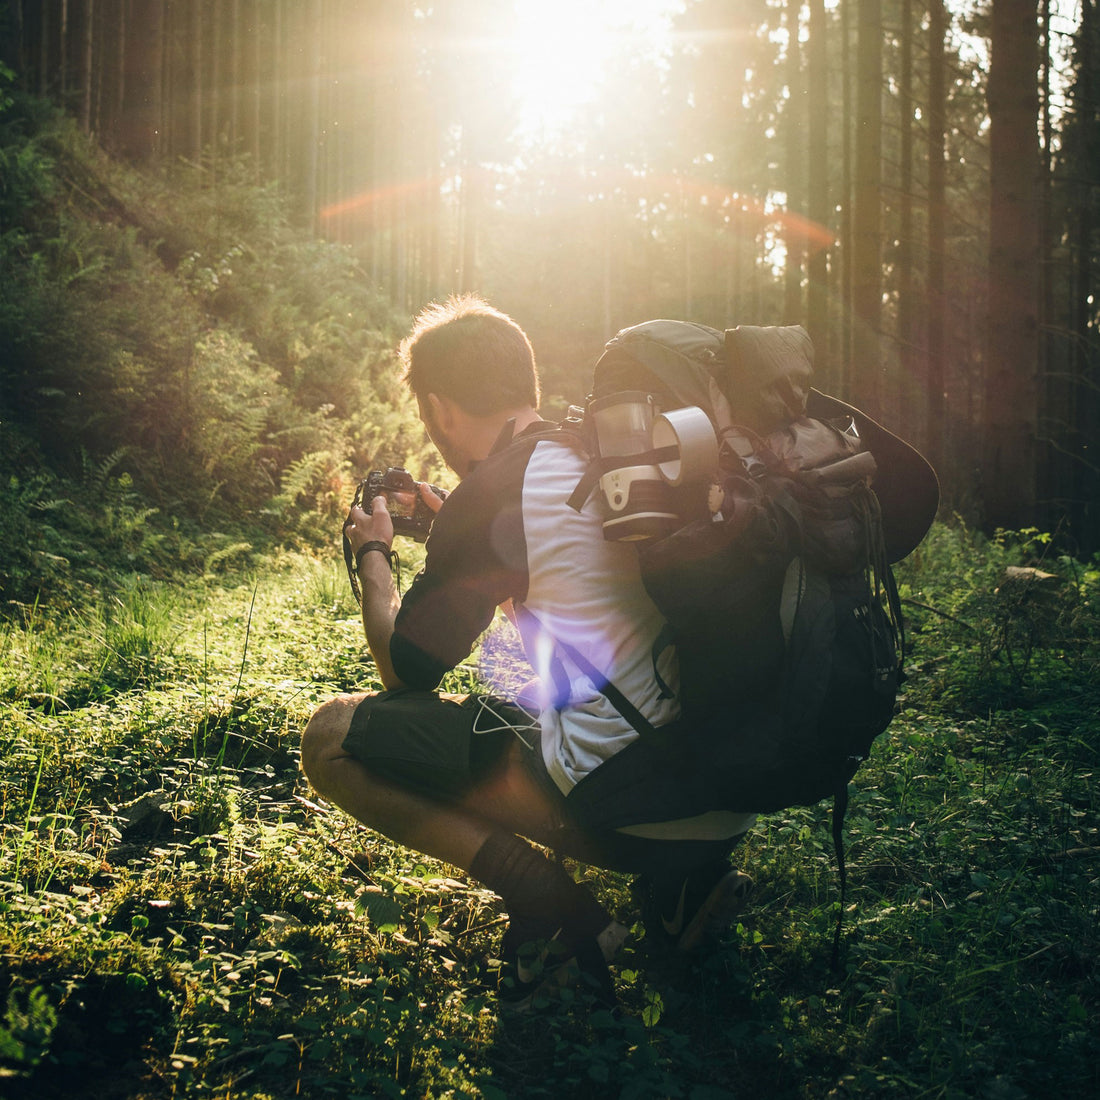 Man wearing a backpack in the woods.